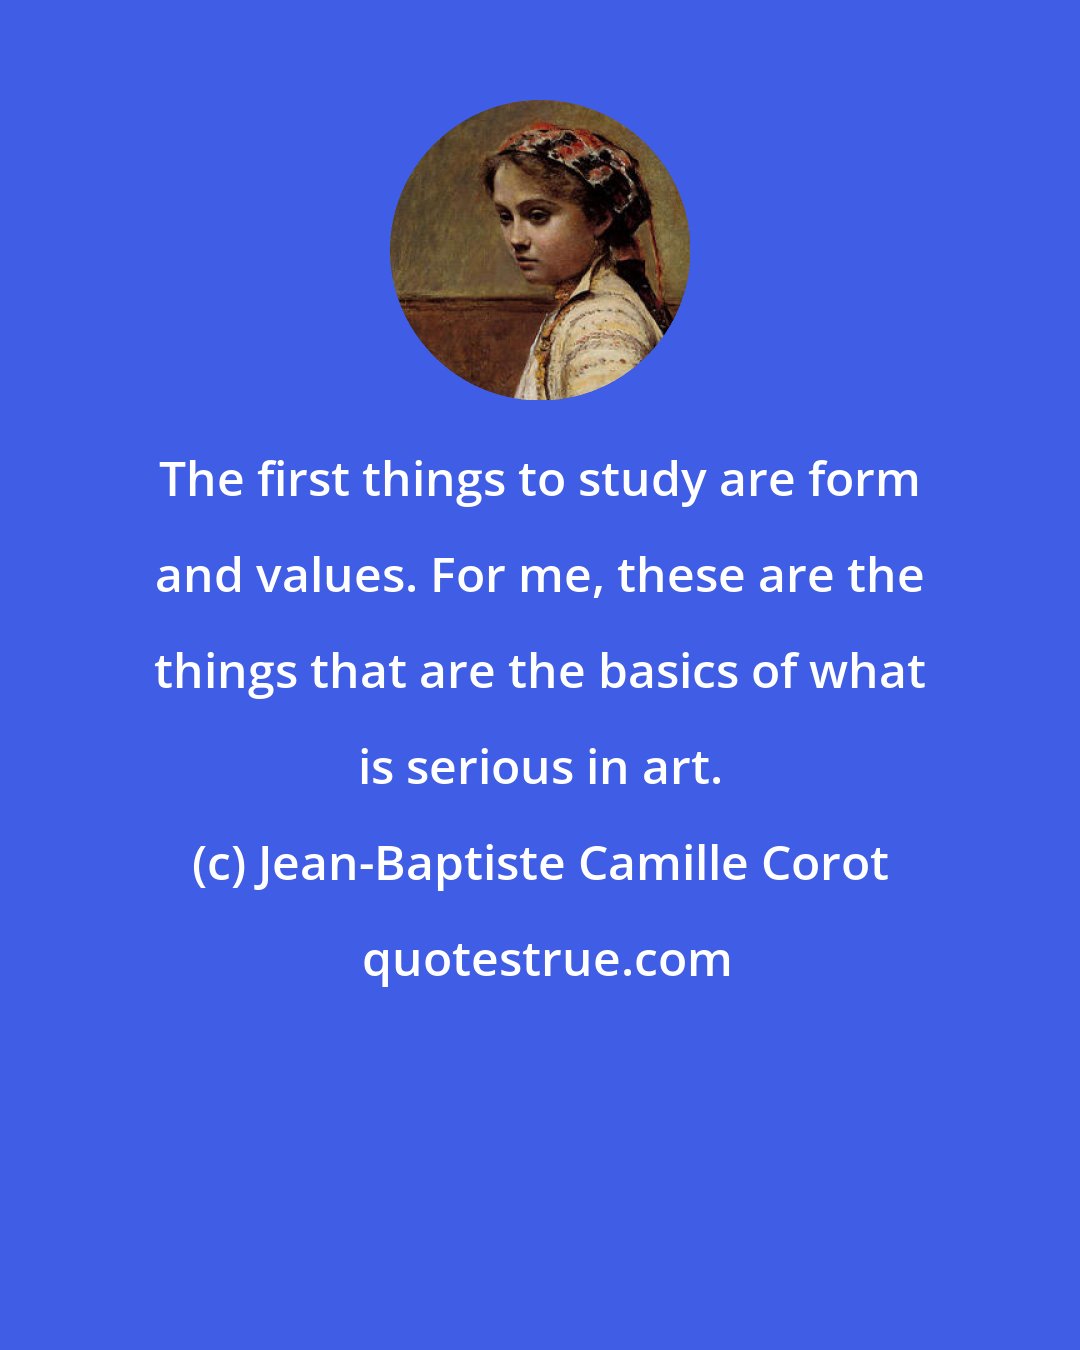 Jean-Baptiste Camille Corot: The first things to study are form and values. For me, these are the things that are the basics of what is serious in art.